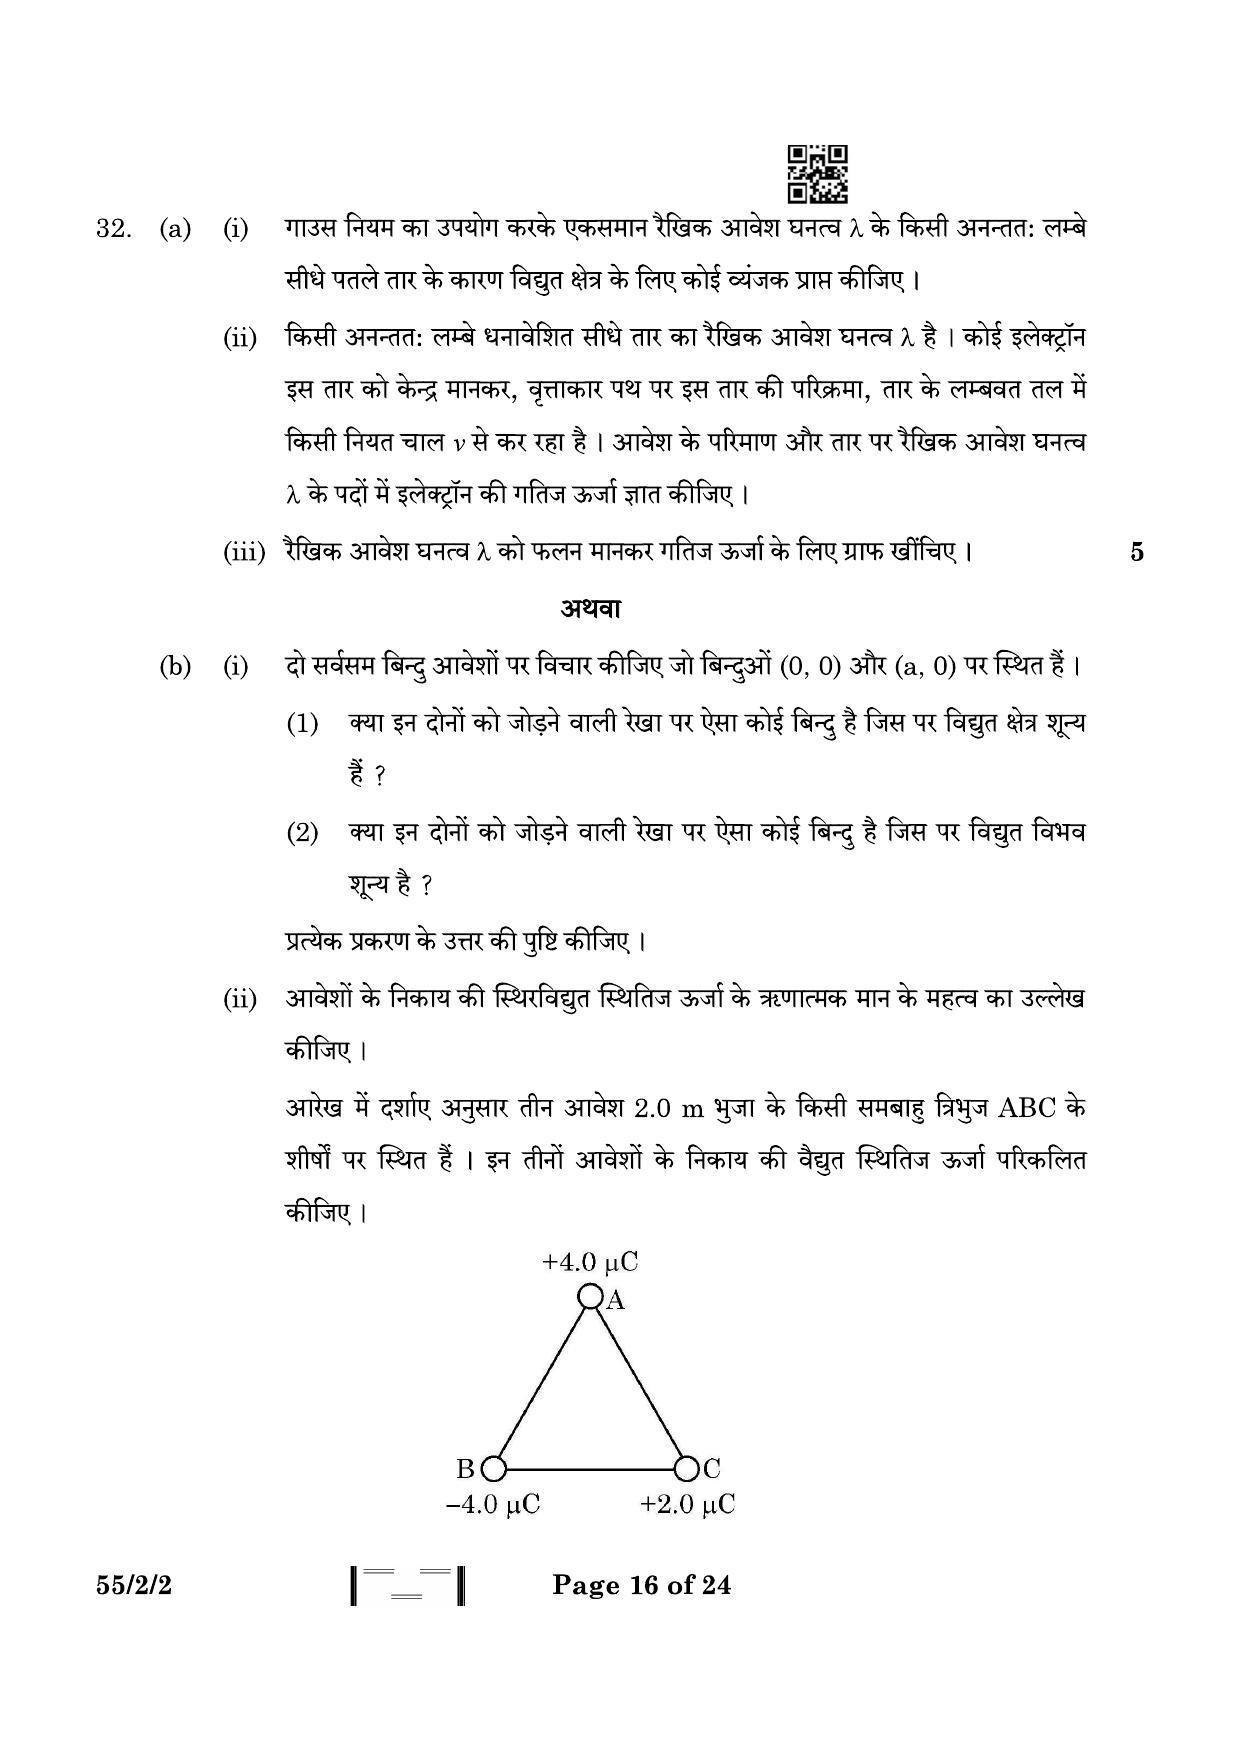 CBSE Class 12 55-2-2 Physics 2023 Question Paper - Page 16